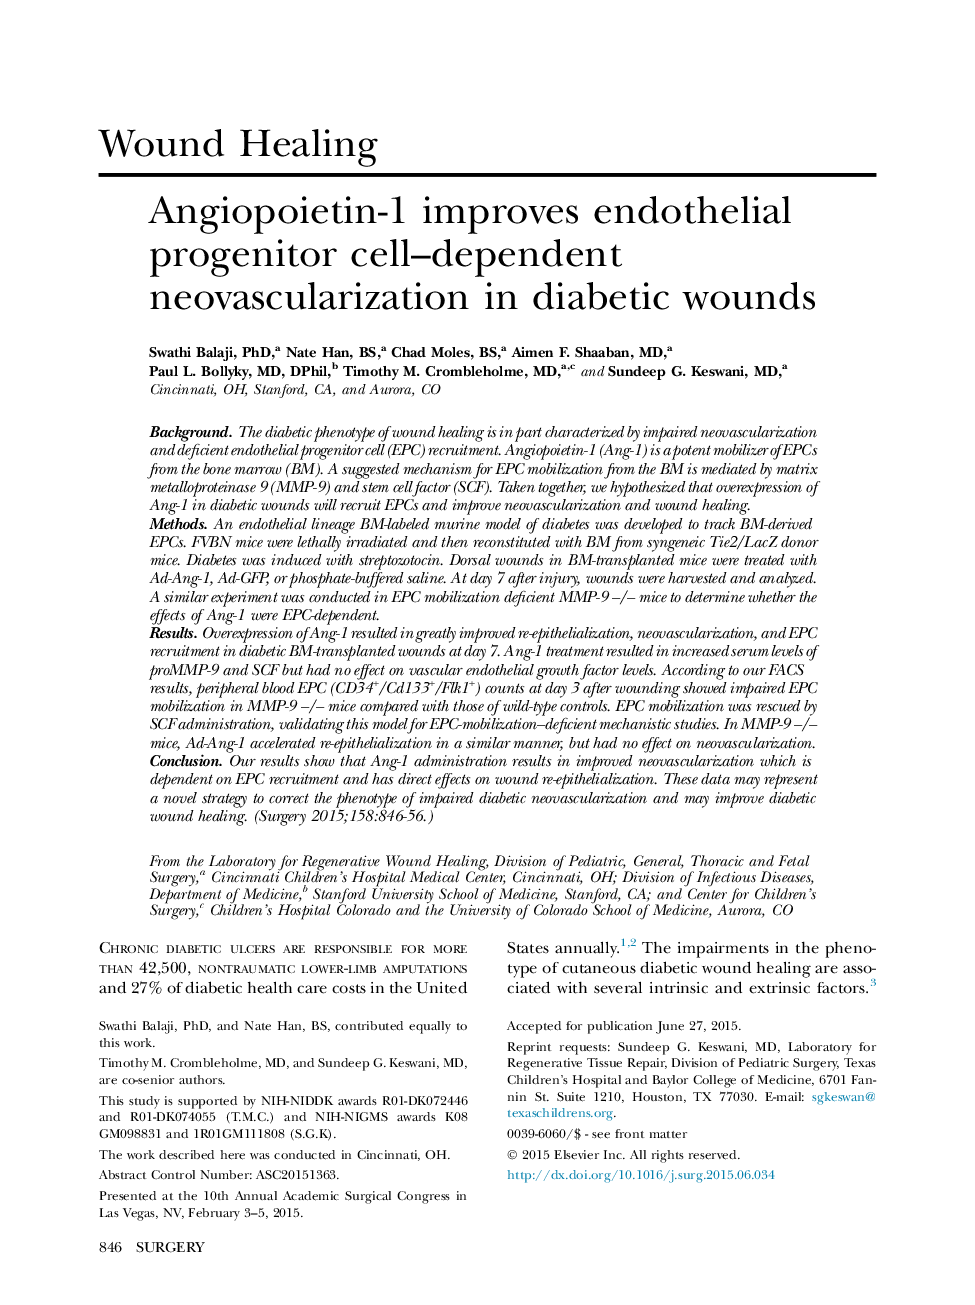 Angiopoietin-1 improves endothelial progenitor cell–dependent neovascularization in diabetic wounds 